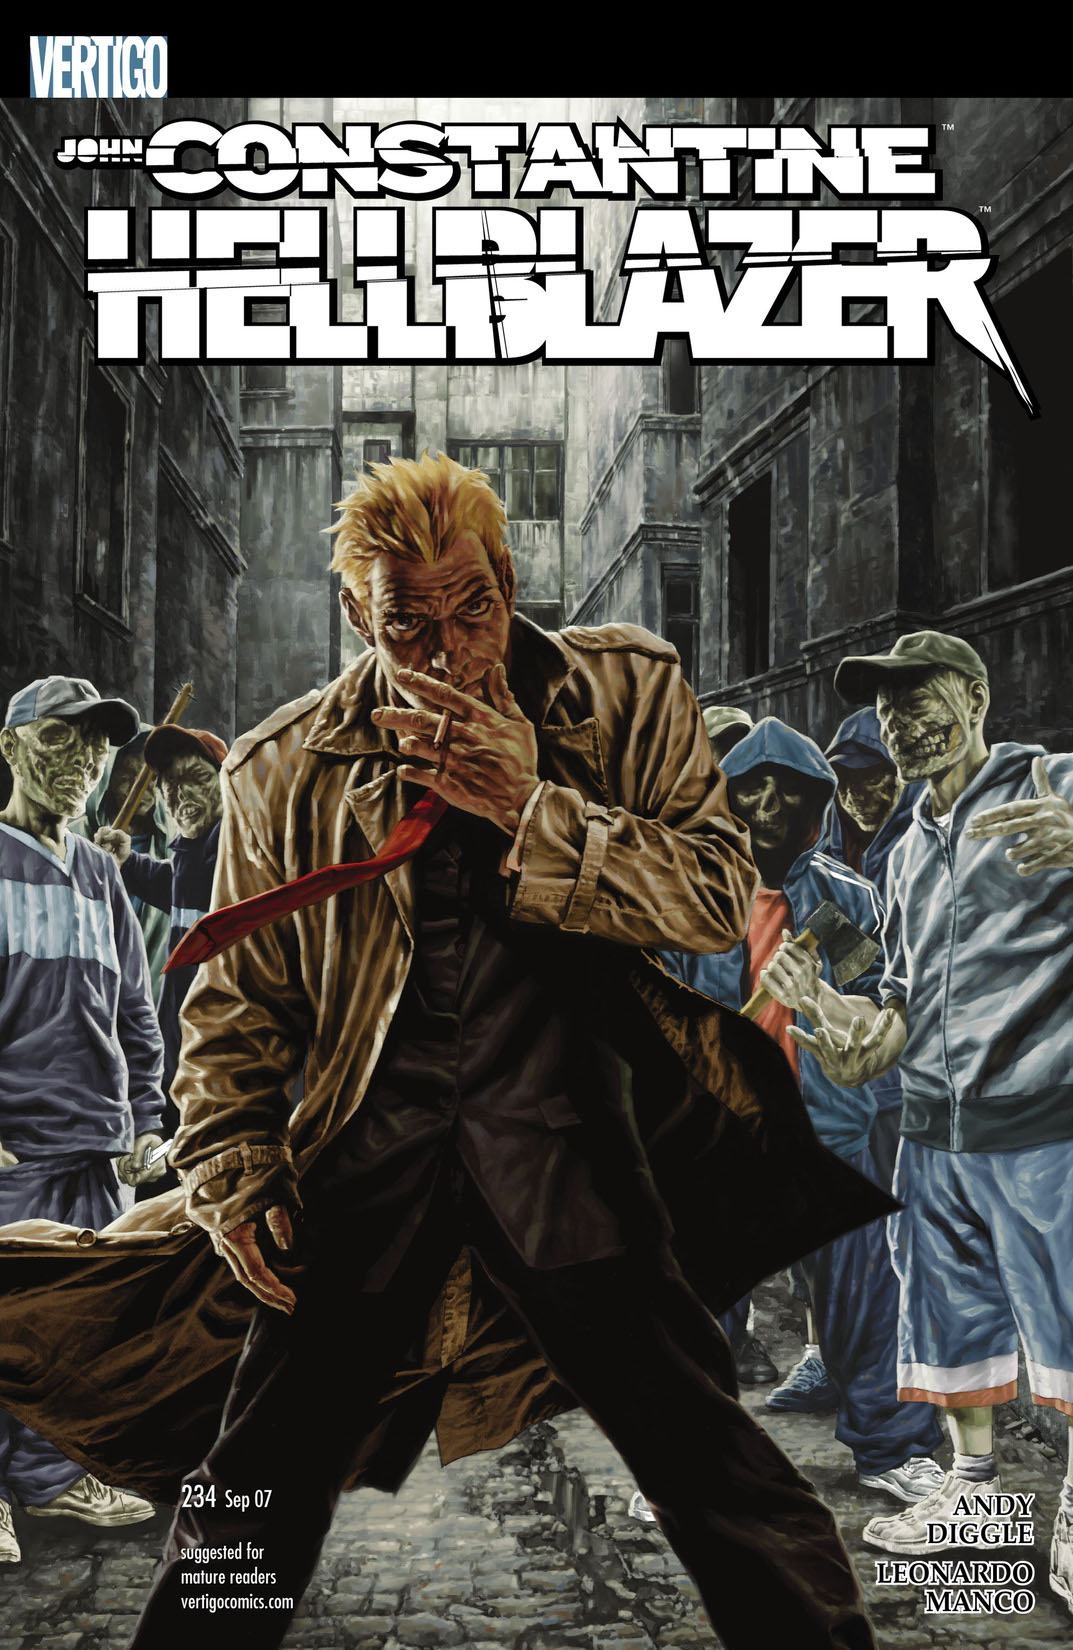 Hellblazer #234 preview images